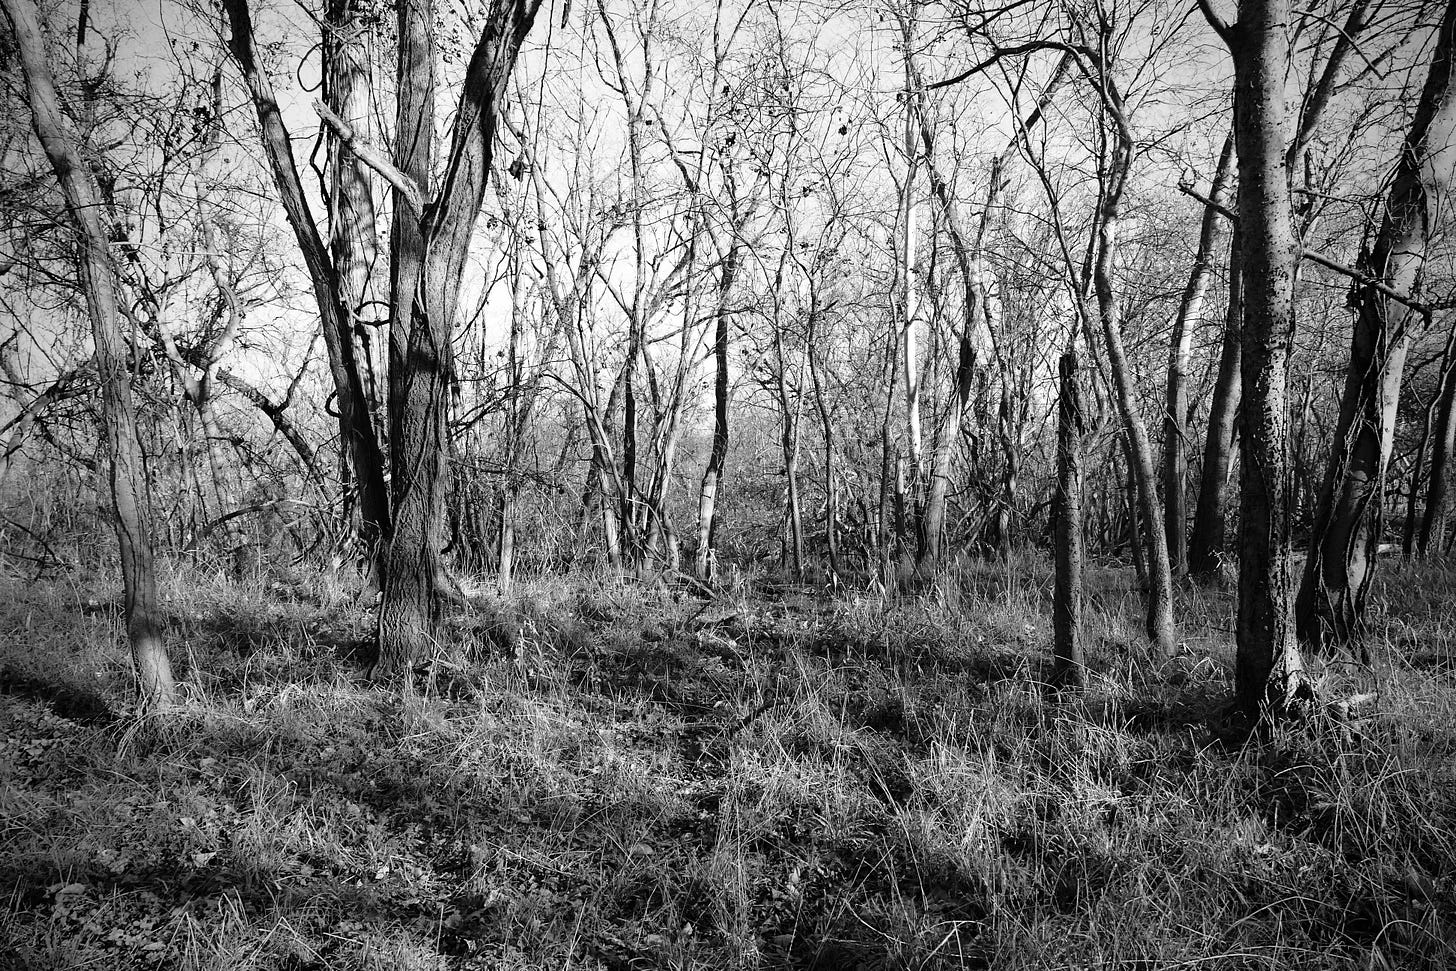 Black and white photo of winter woods, with young sycamores, hackberrys, and wild grass